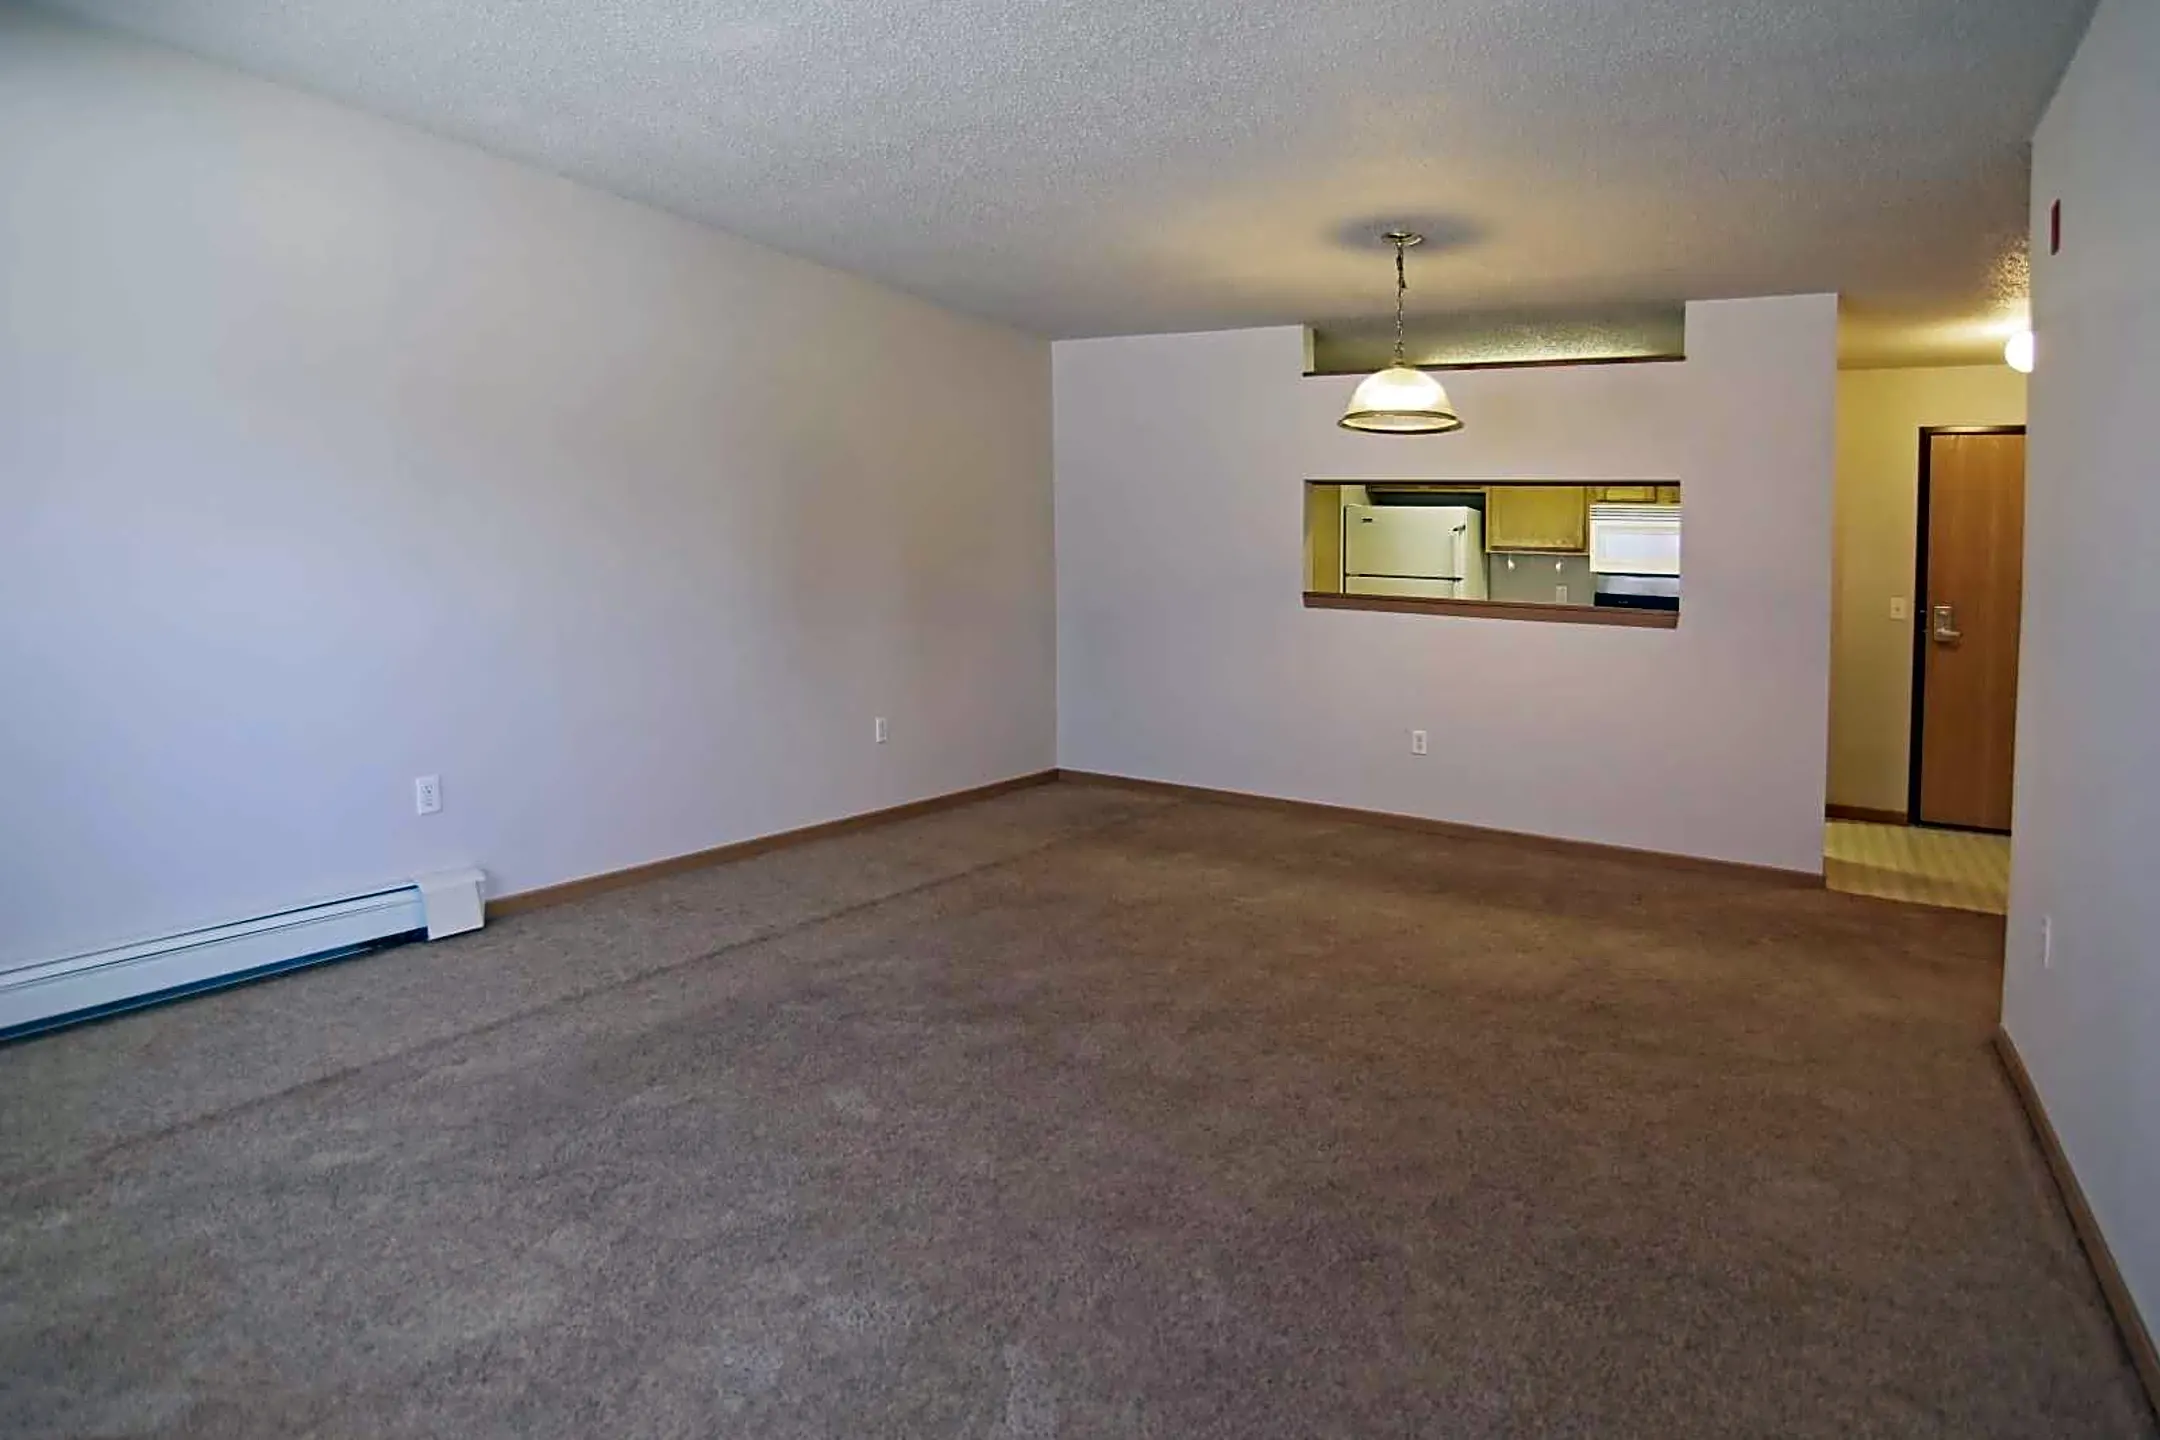 Living Room - Ithica Heights - Bismarck, ND